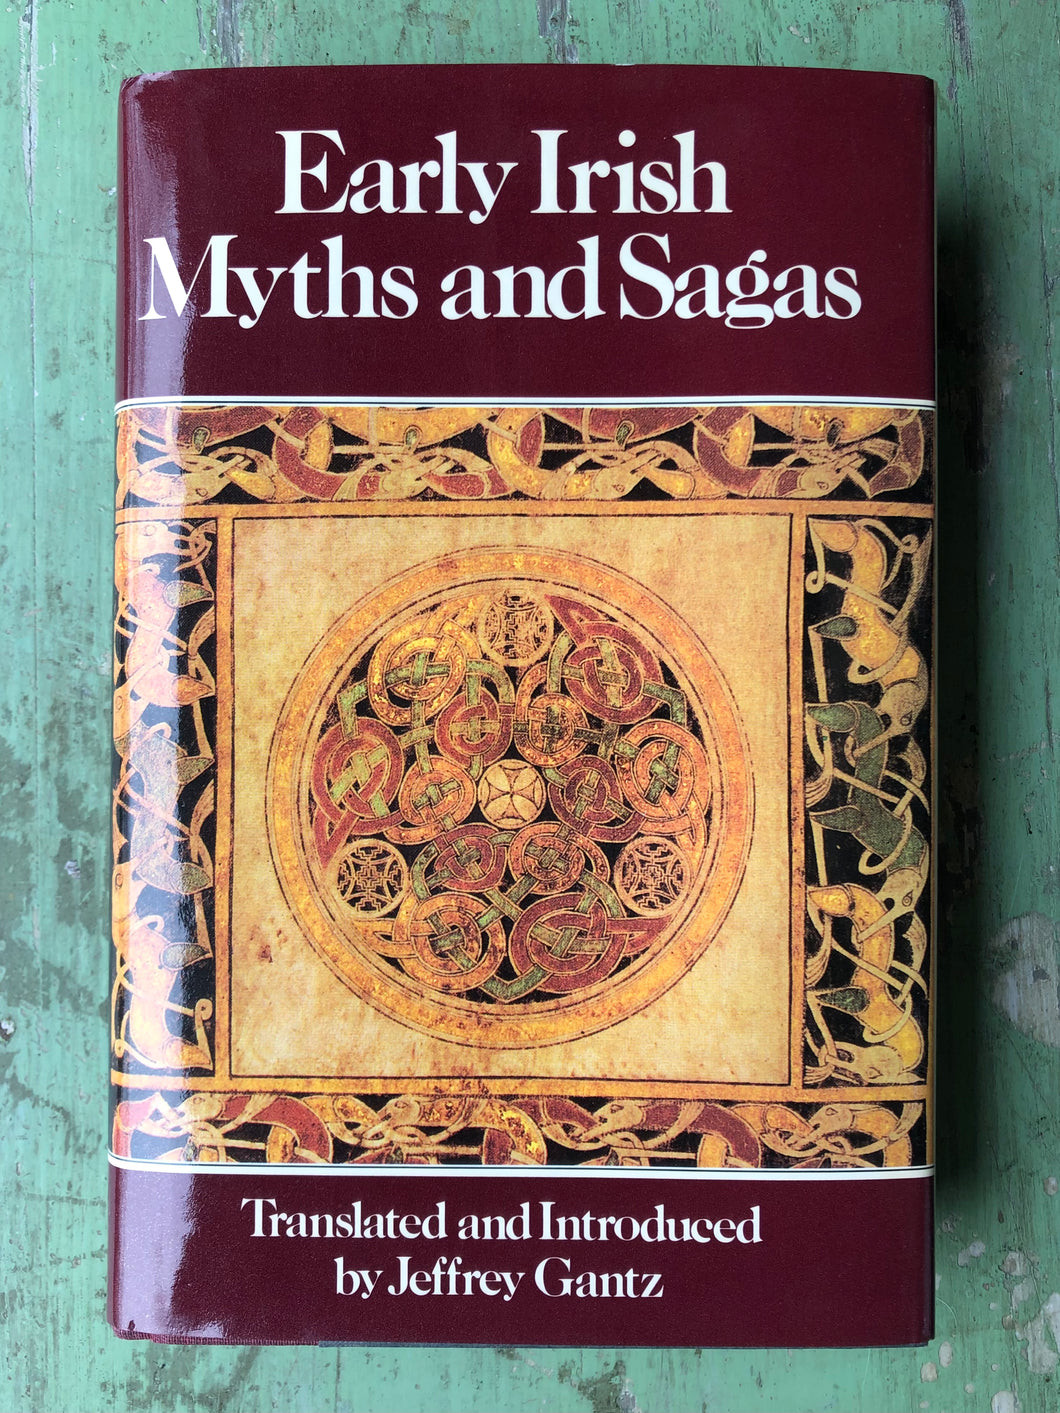 Early Irish Myths and Sagas. Translated with an introduction by Jeffrey Gantz